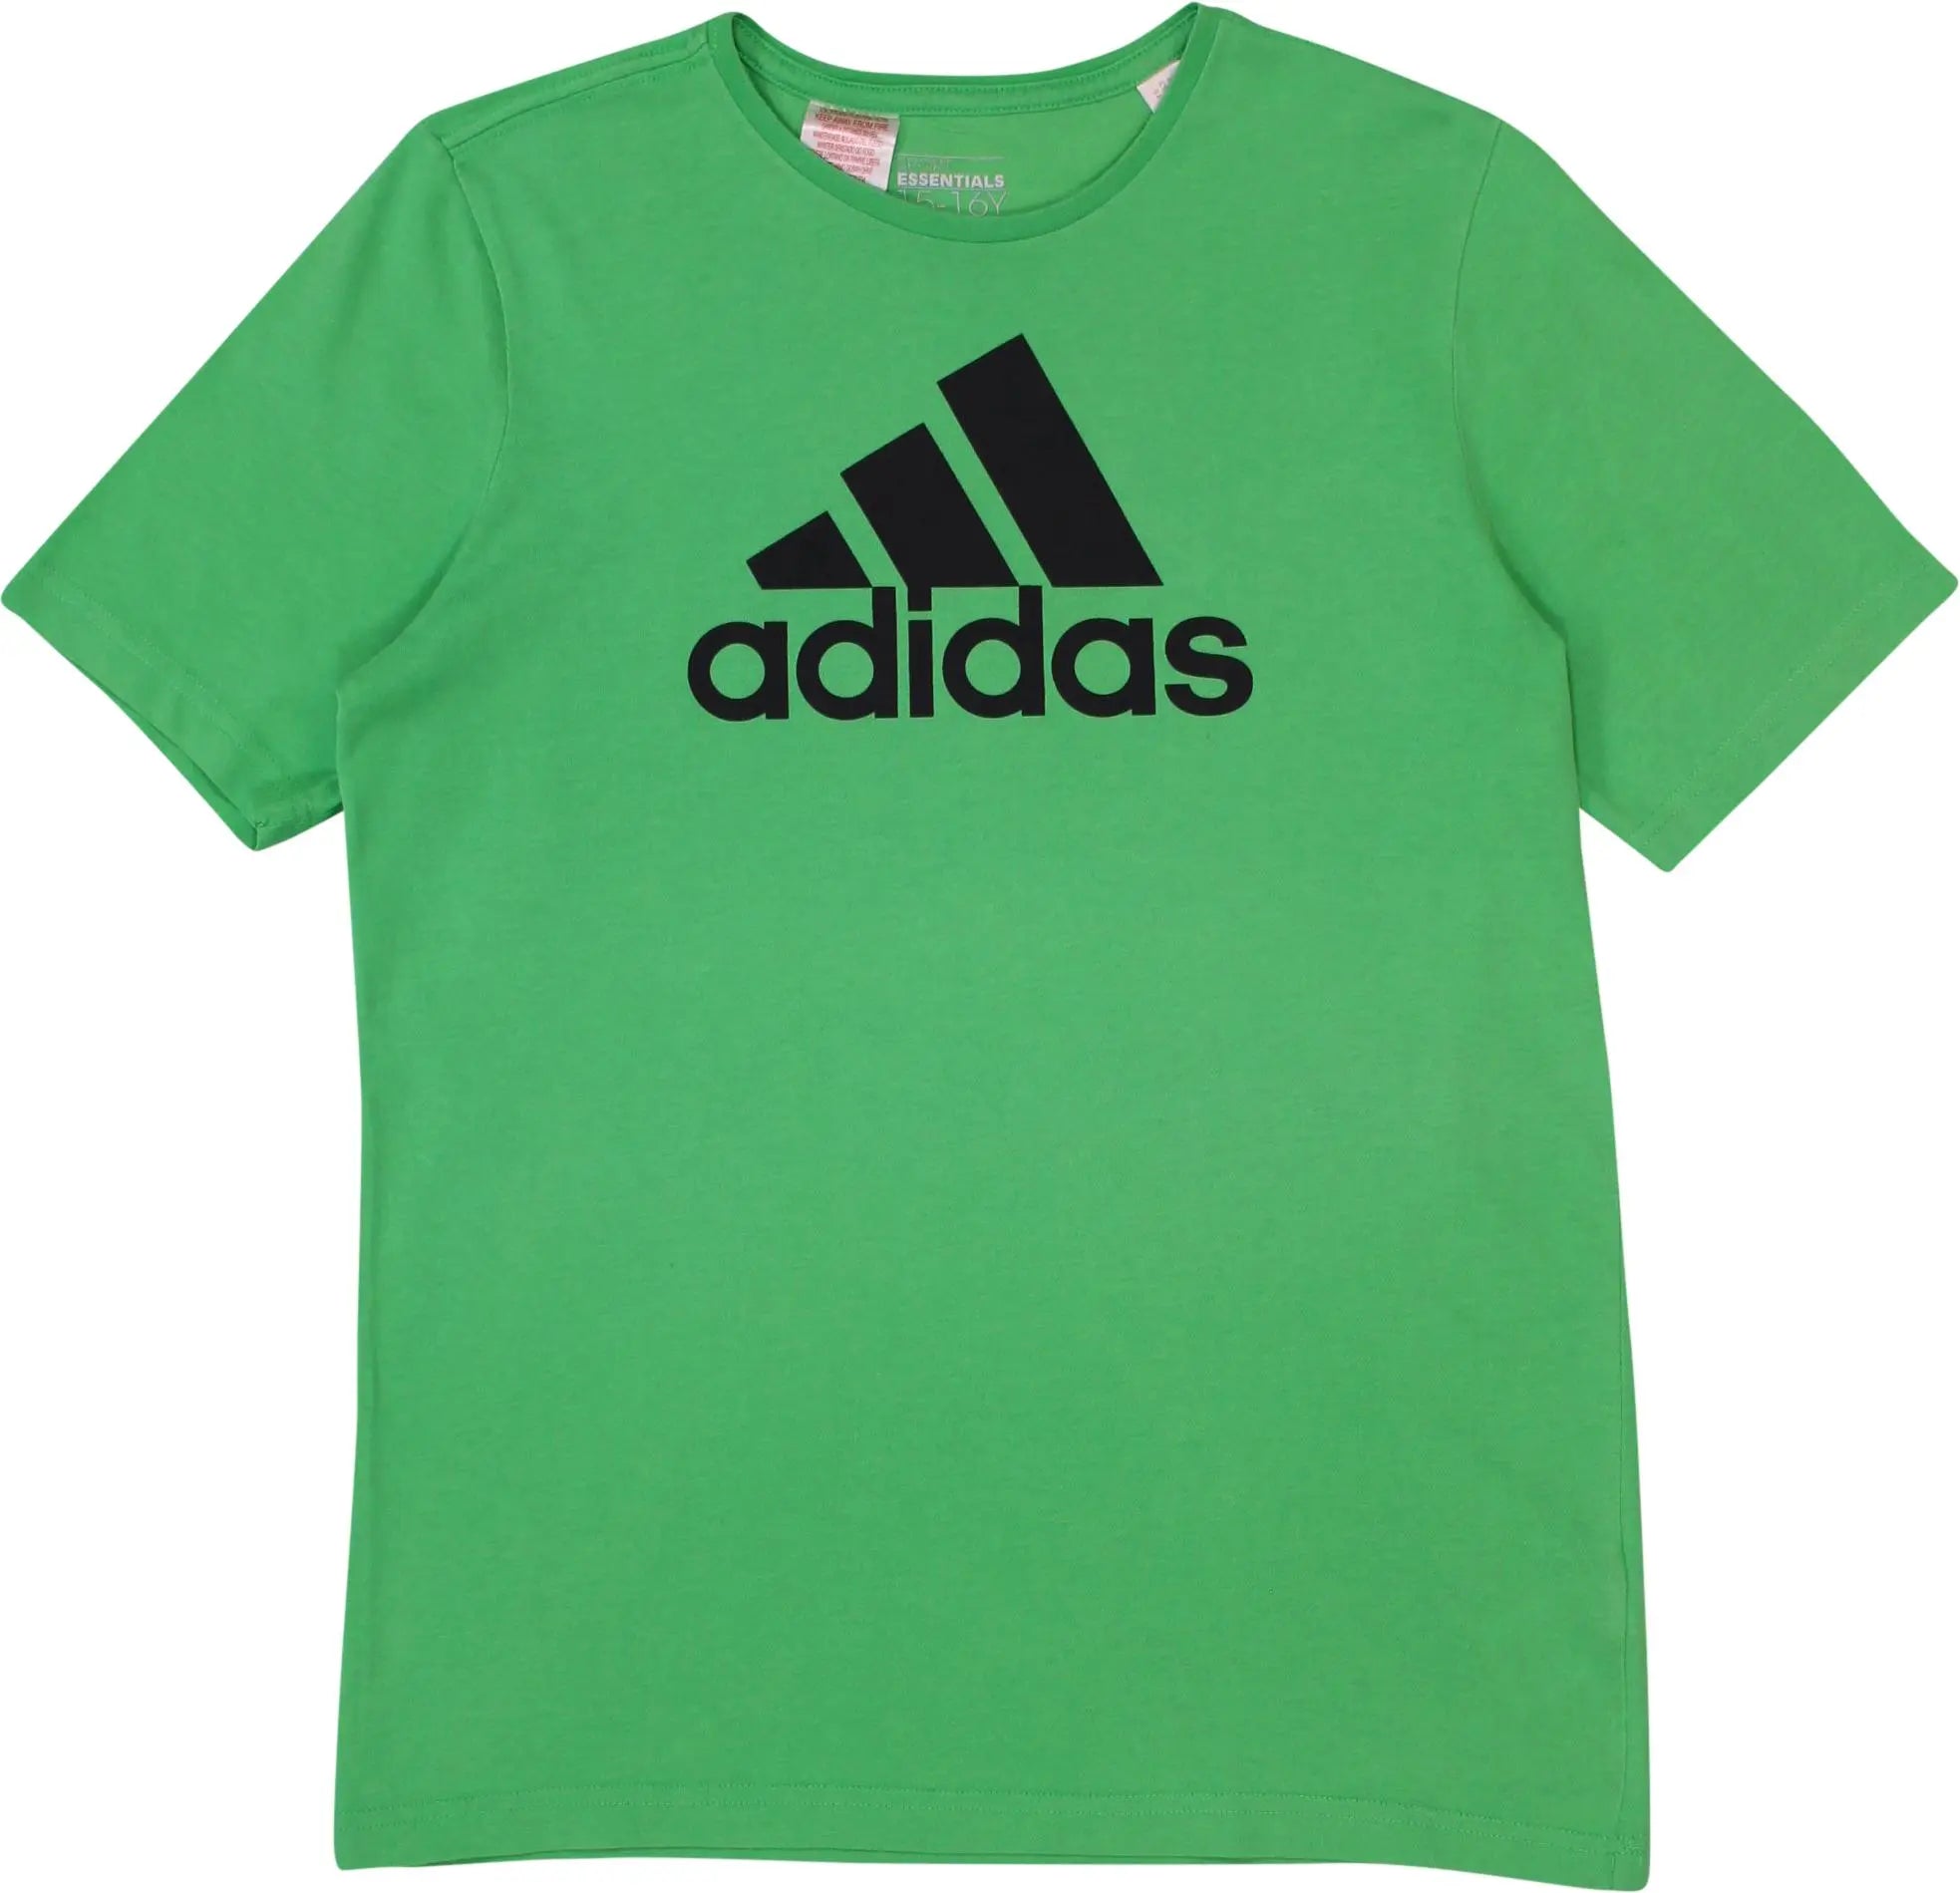 Adidas - Green Sport T-shirt by Adidas- ThriftTale.com - Vintage and second handclothing